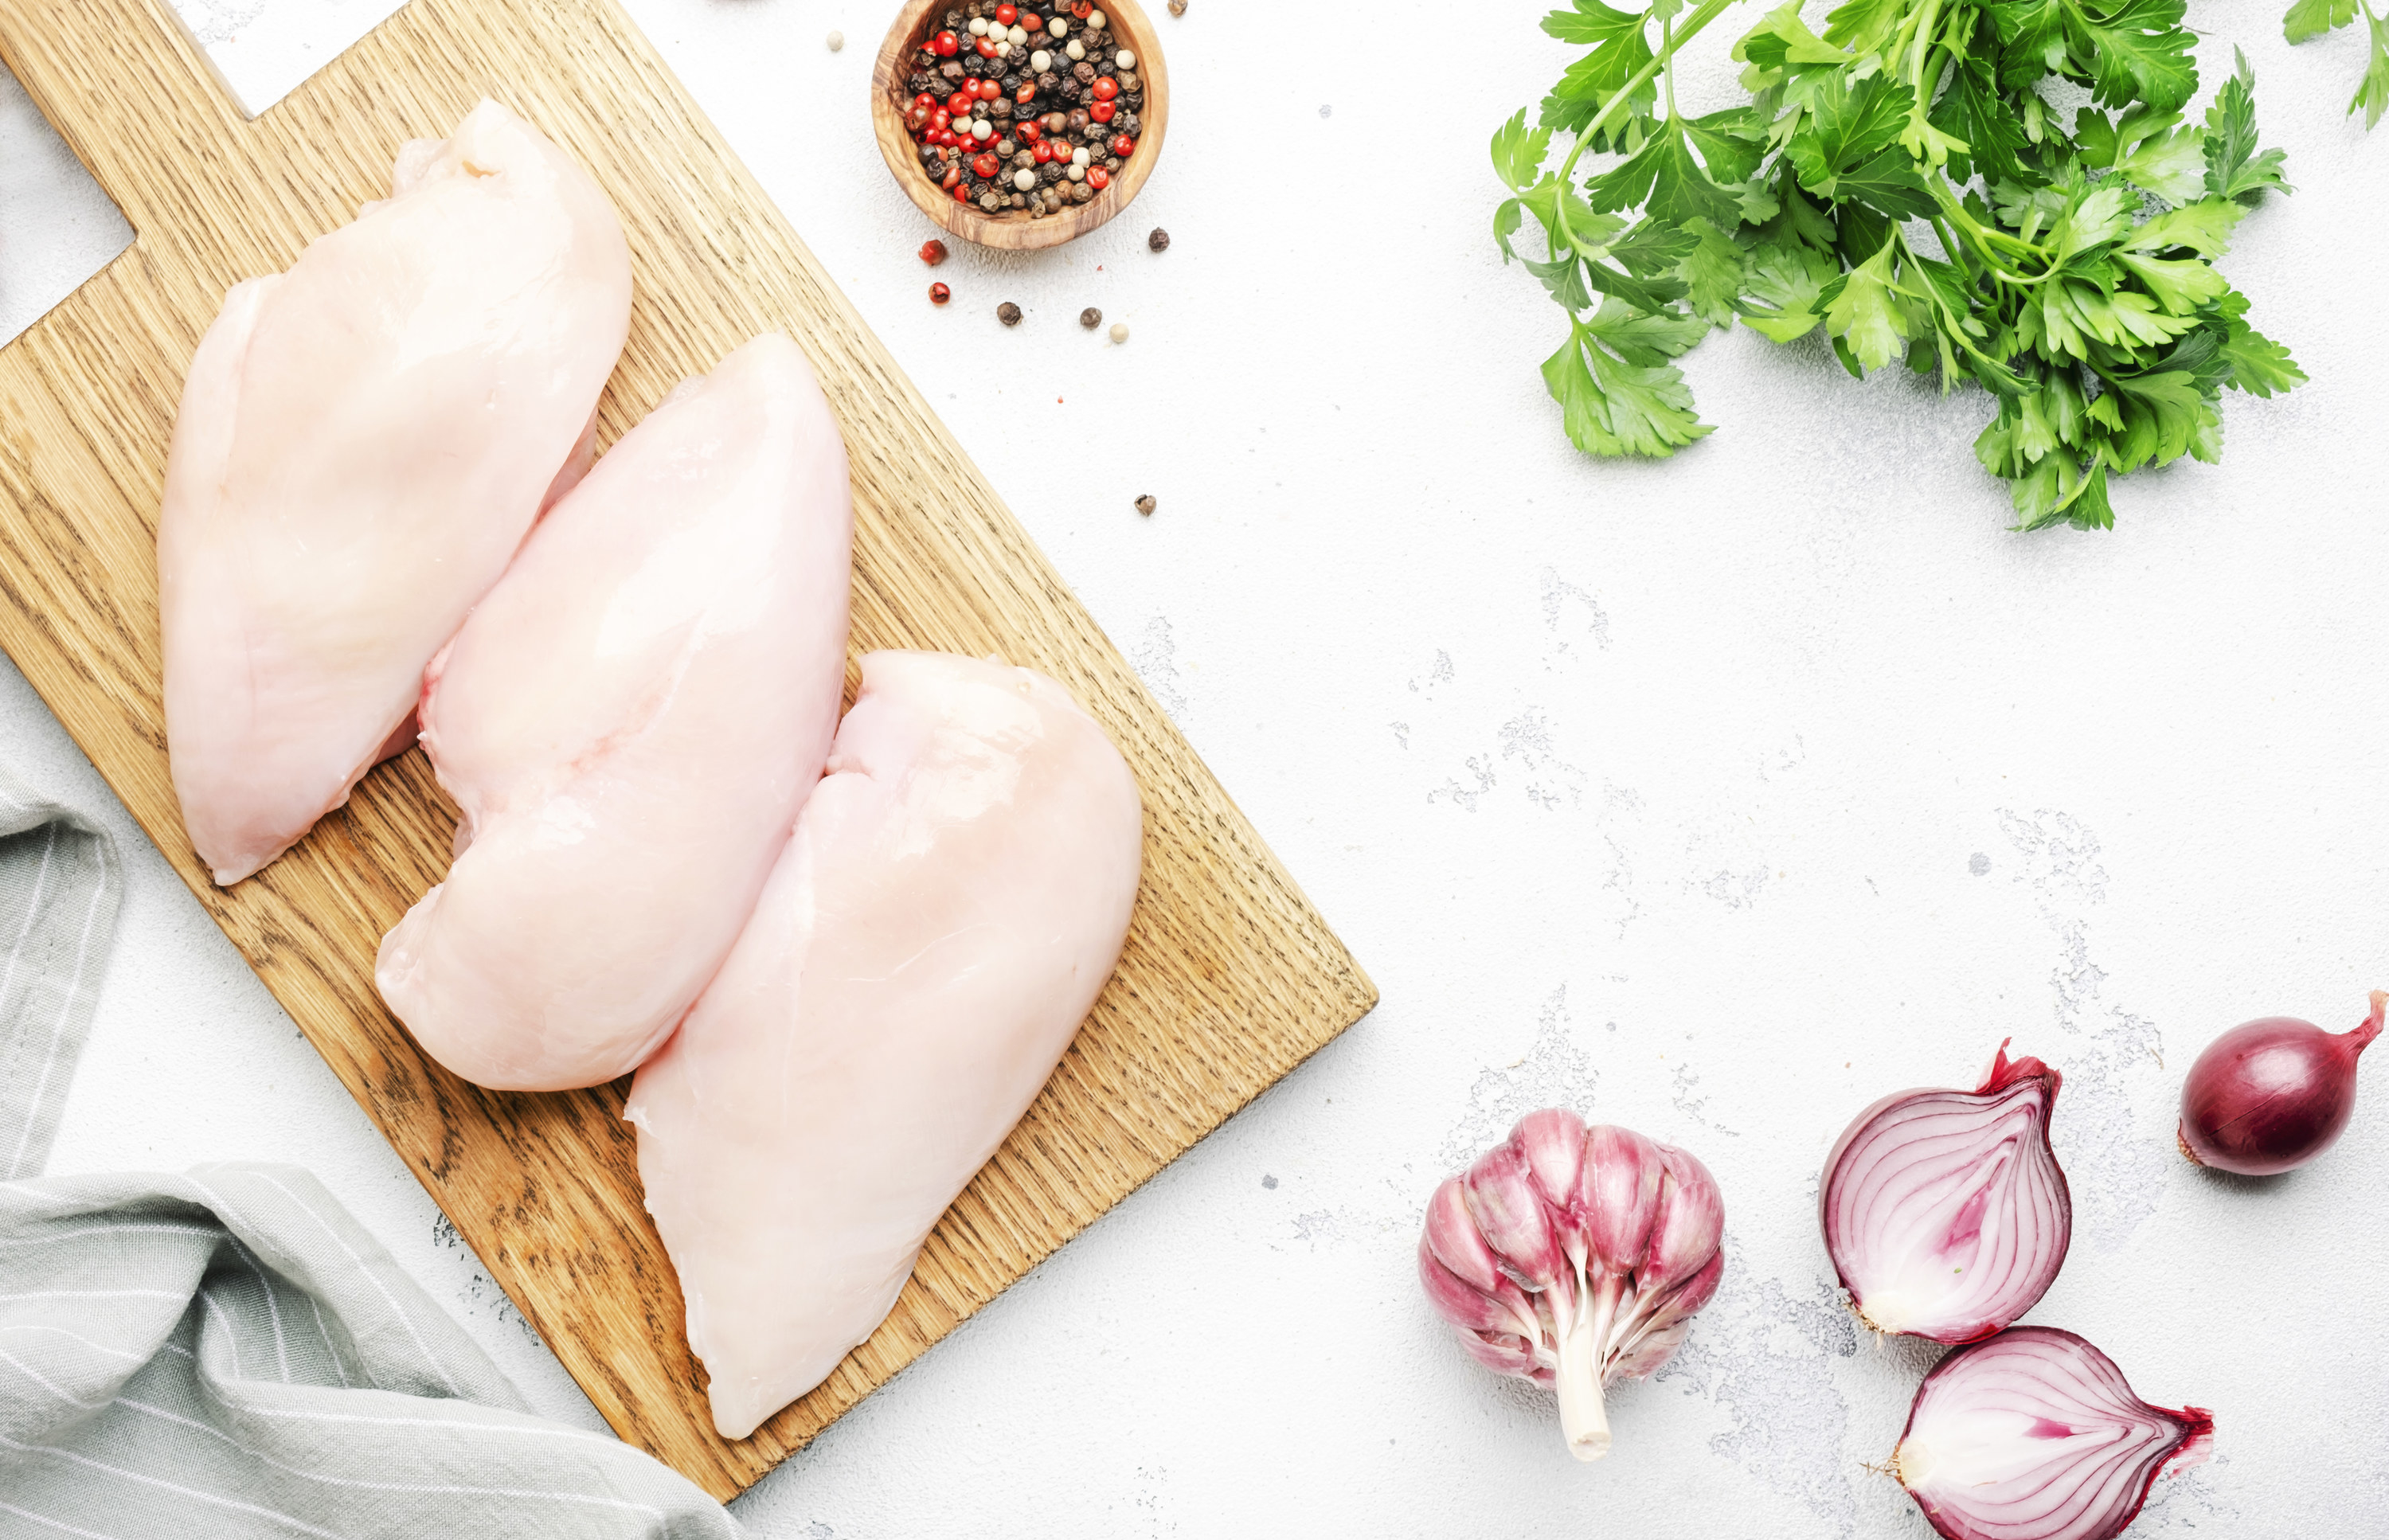 Raw chicken breast fillet, meat on cutting board prepared for cooking with garlic, thyme, spices and pepper, top view